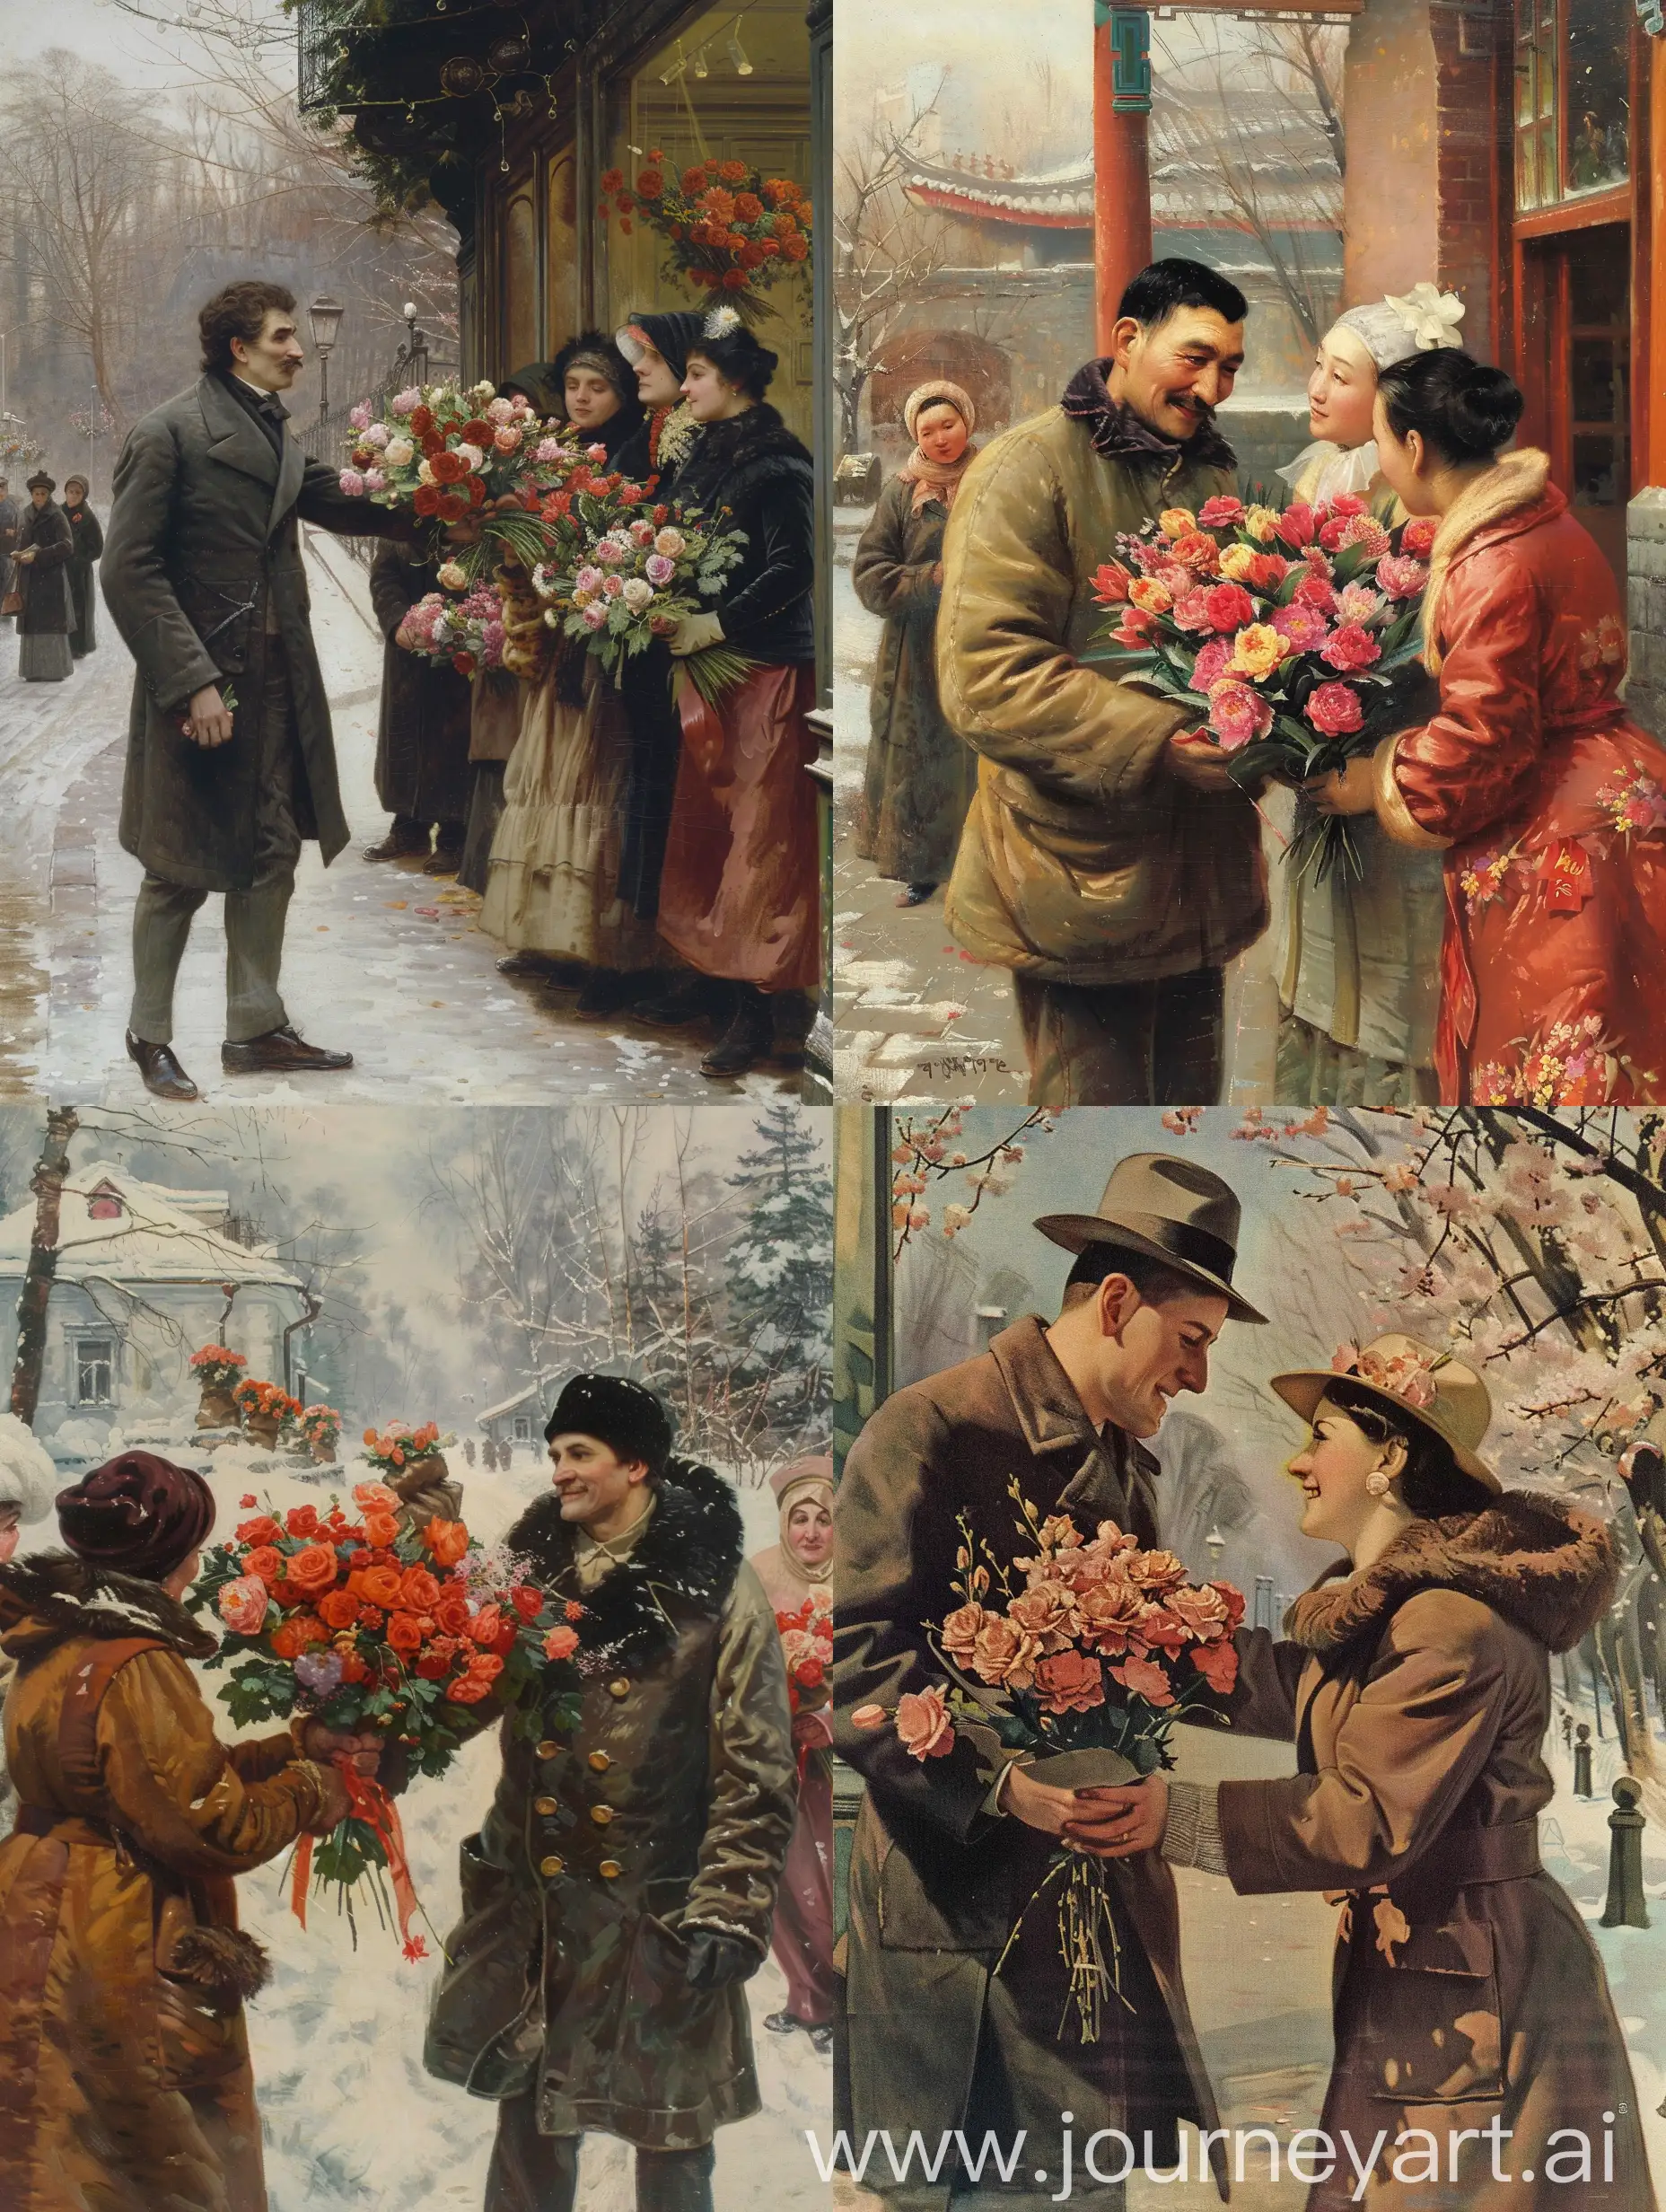 March-8-Celebration-Man-Presenting-Flowers-to-Women